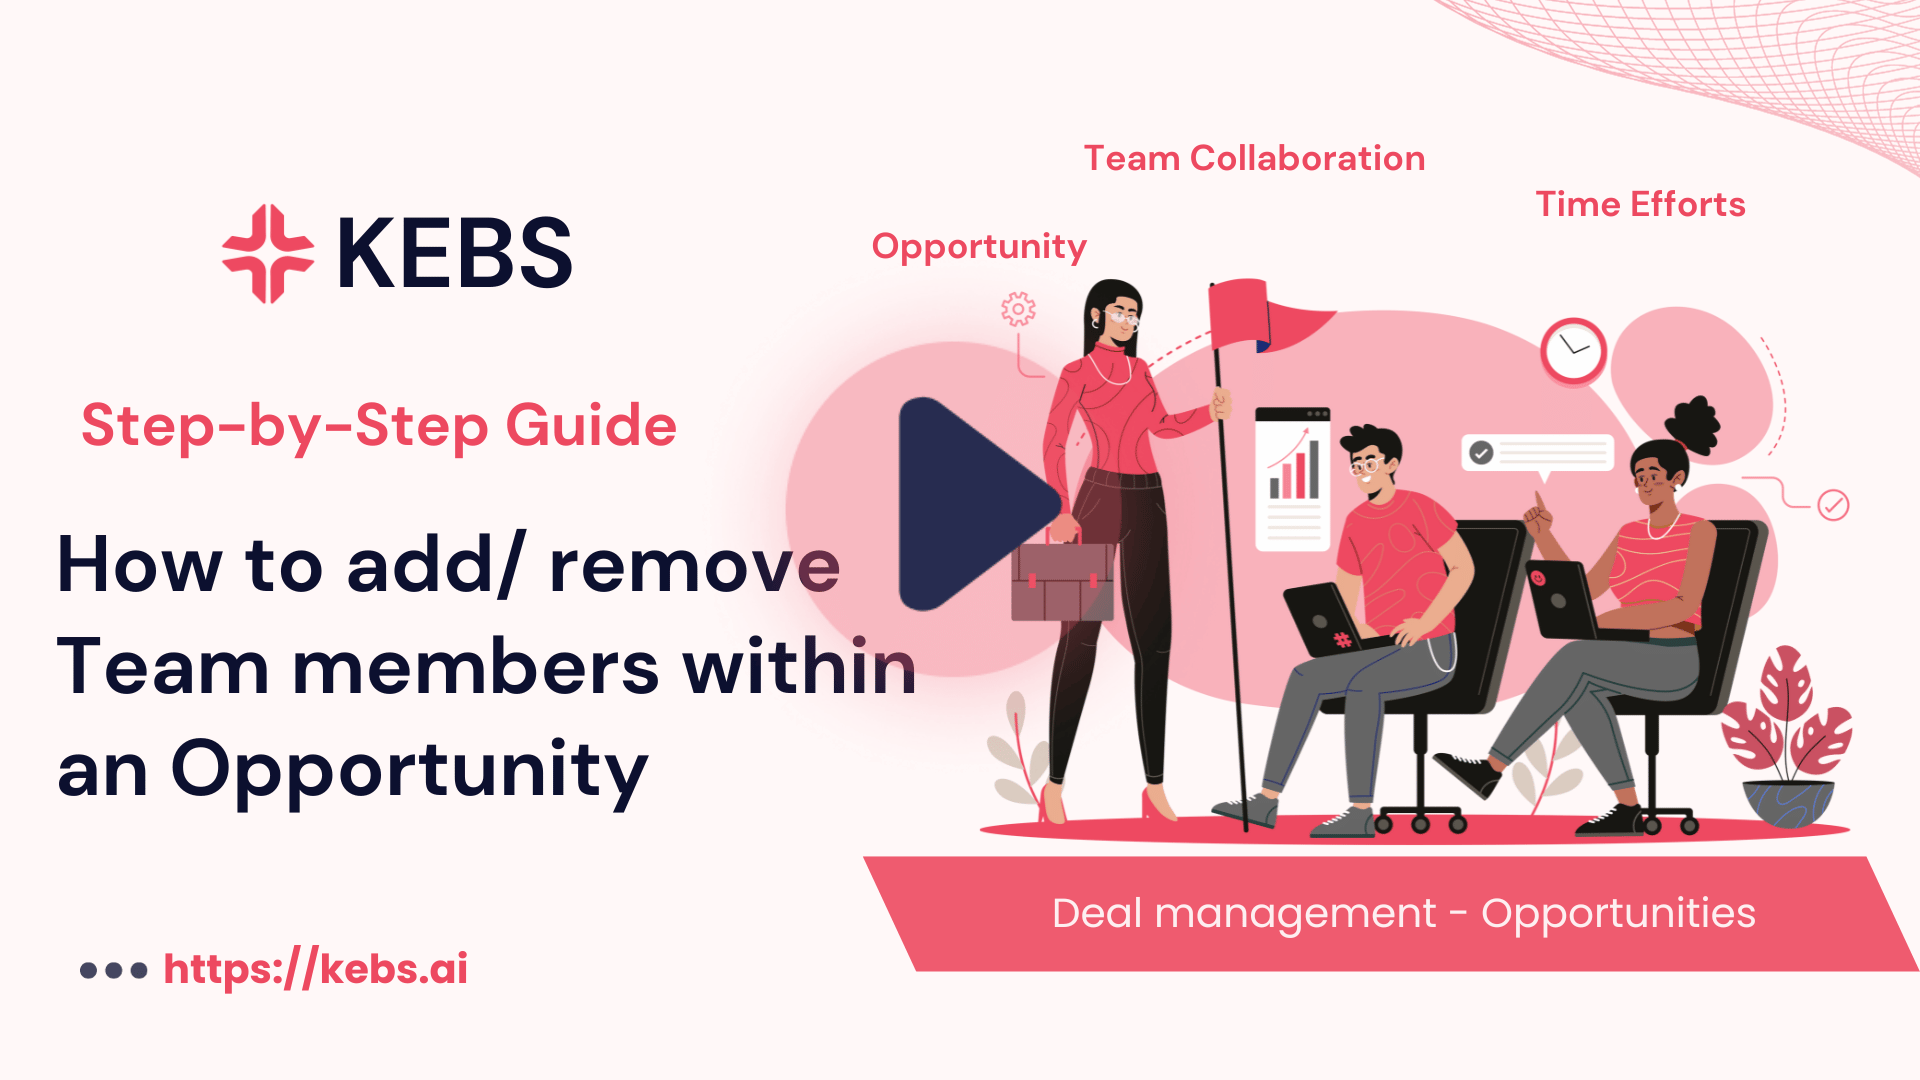 How to add remove Team members within an Opportunity